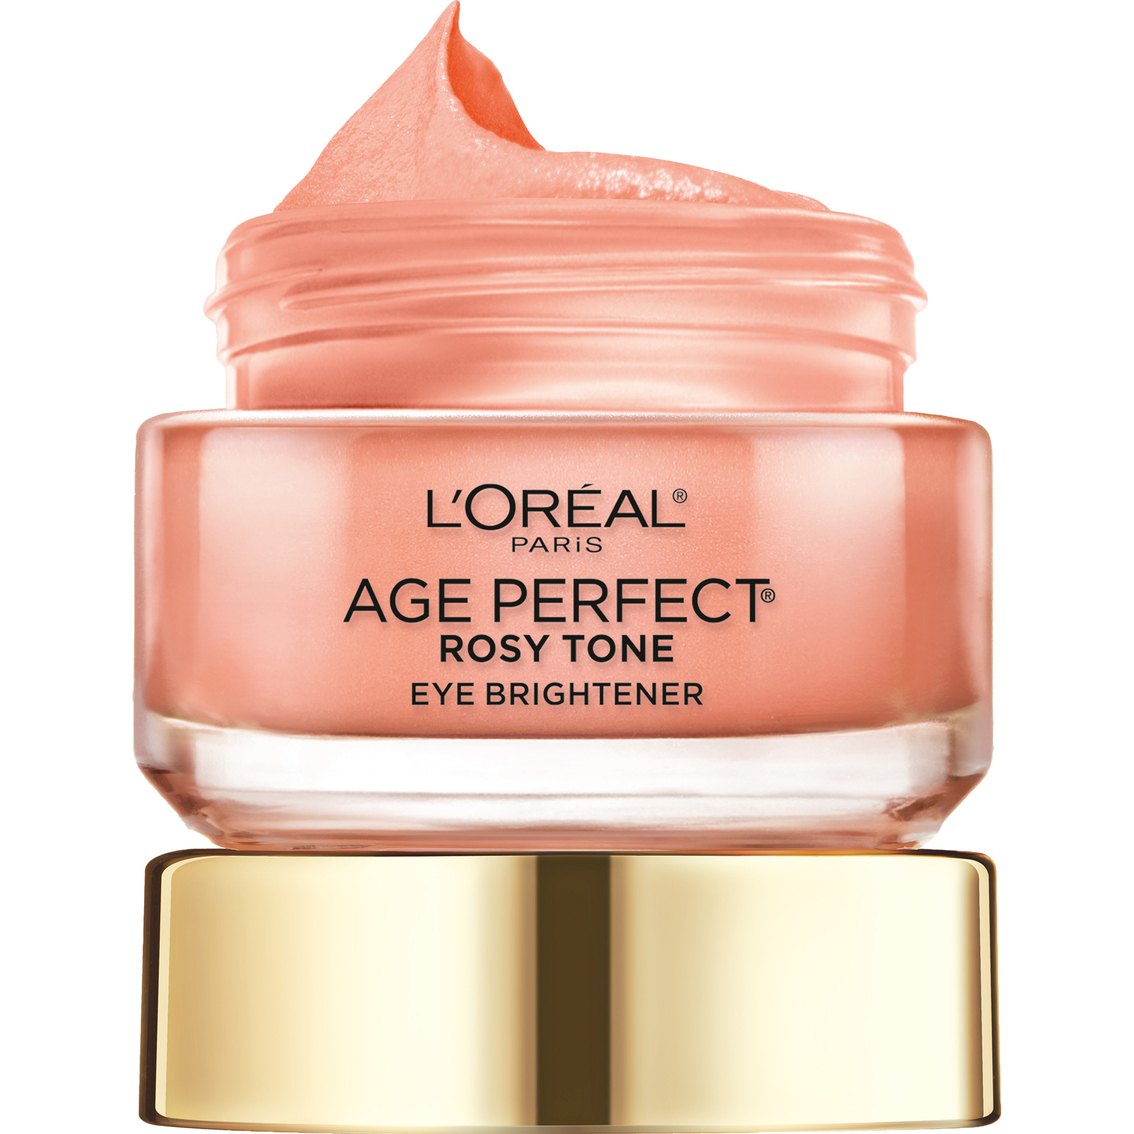 L'Oreal Age Perfect Rosy Tone Anti Aging Eye Brightener - Image 6 of 10